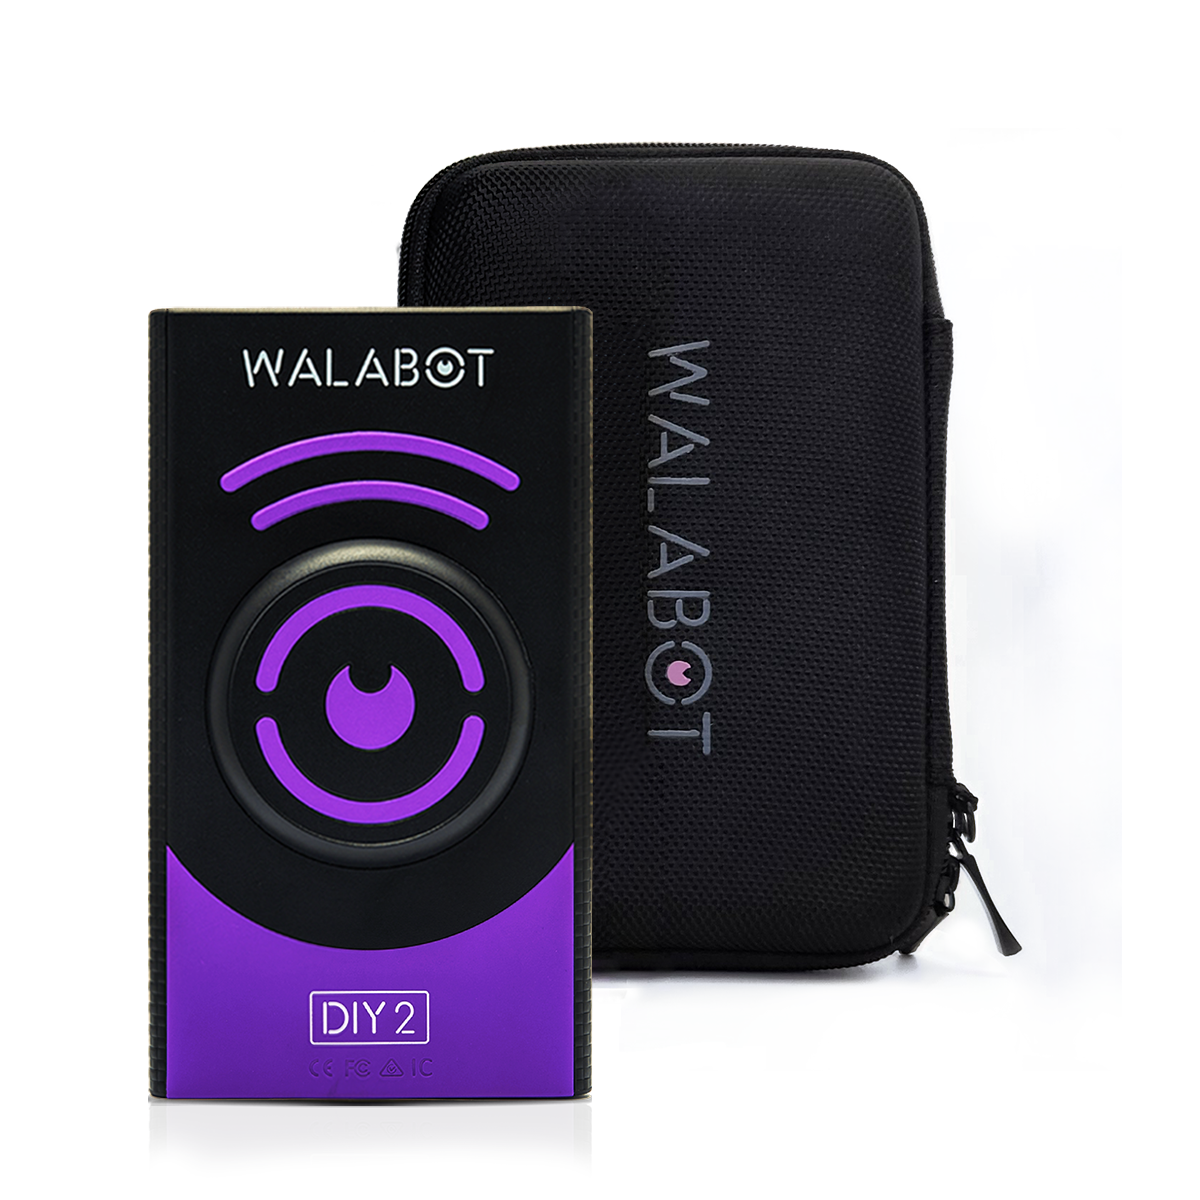 WALABOT DIY 2 - Advanced Stud Finder and Wall Scanner for Android & iOS